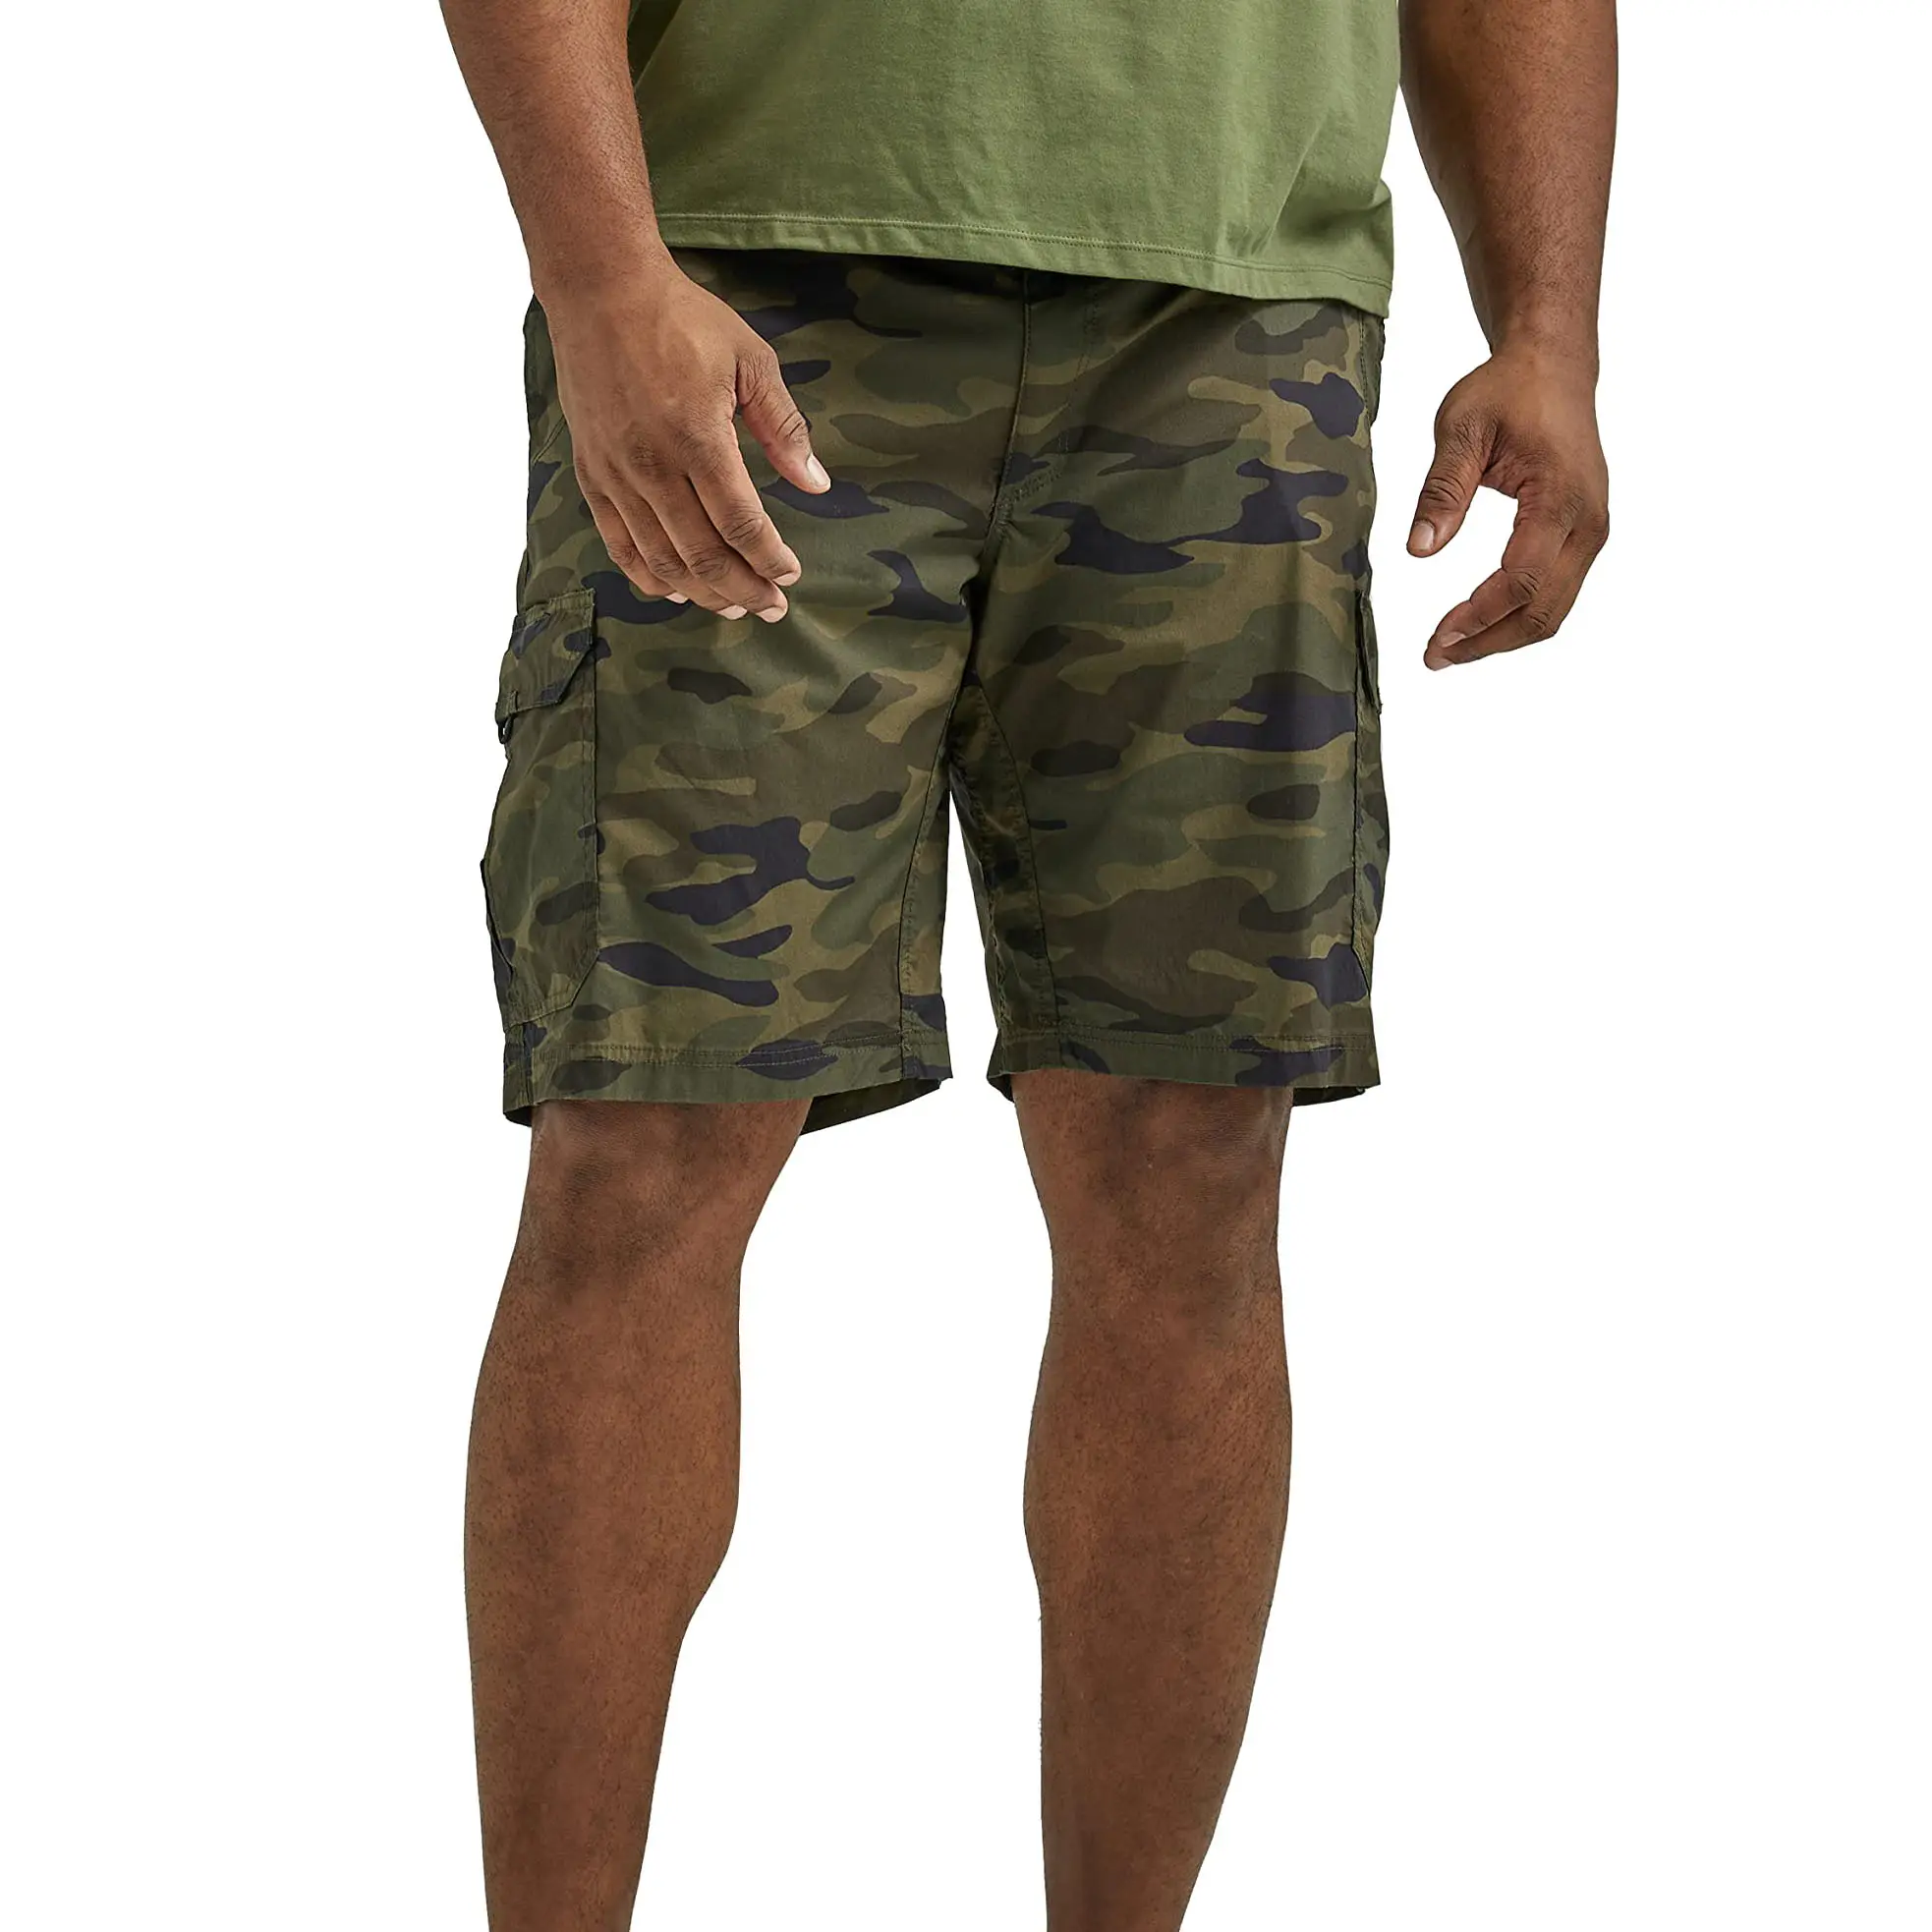 Ready To Ship In Stock Sustainable Street Wear Shorts Camouflage Printed Fabric Men Casual Cargo Shorts Supplier From Pakistan